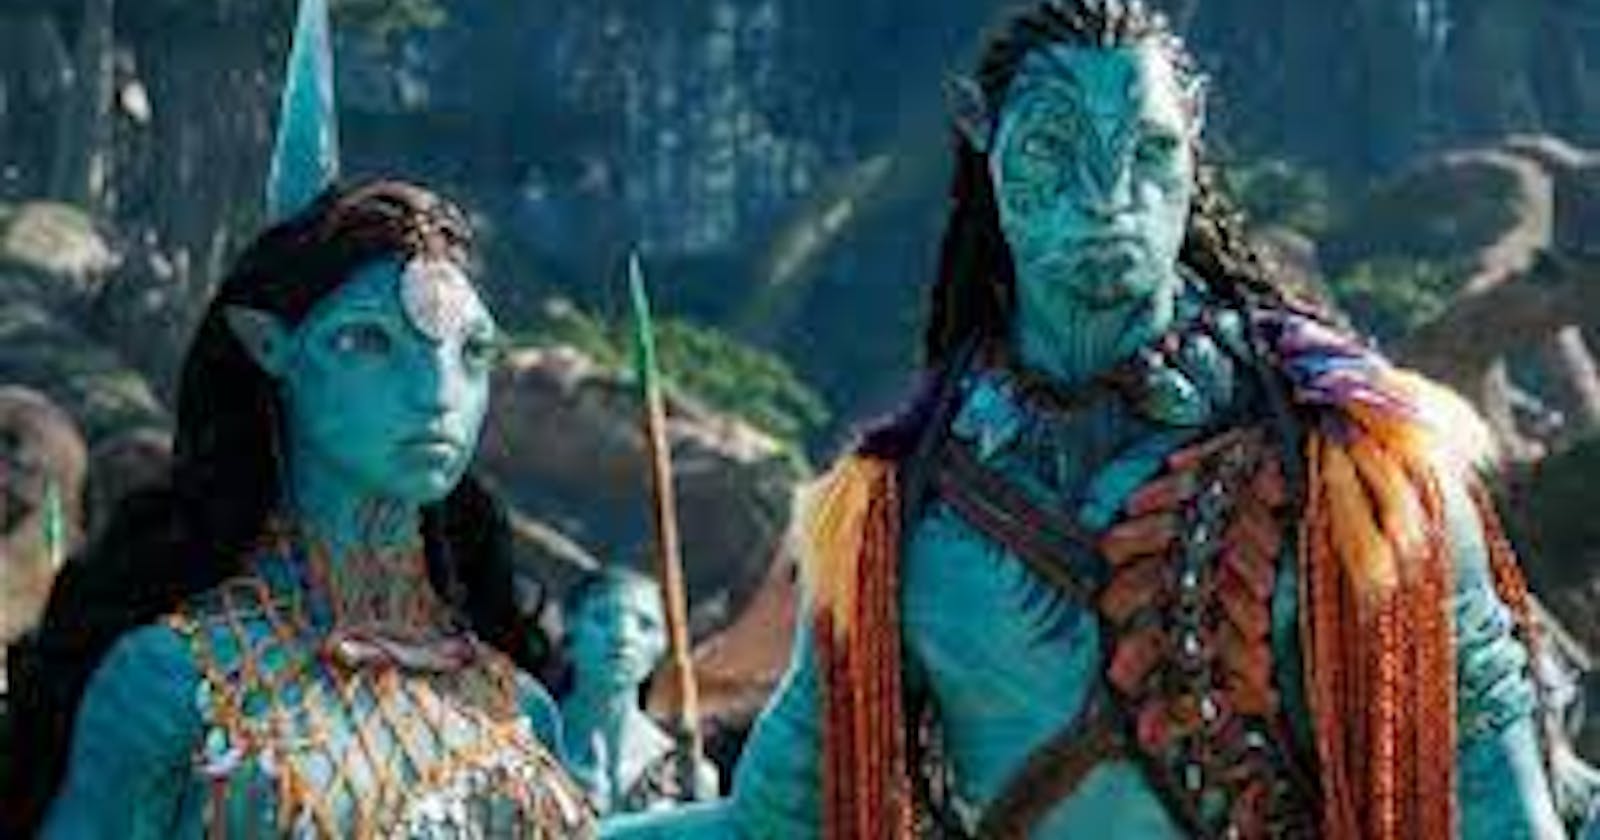 *Avatar 2 The Way of Water full movie online for free Download Free 720p, 480p HD